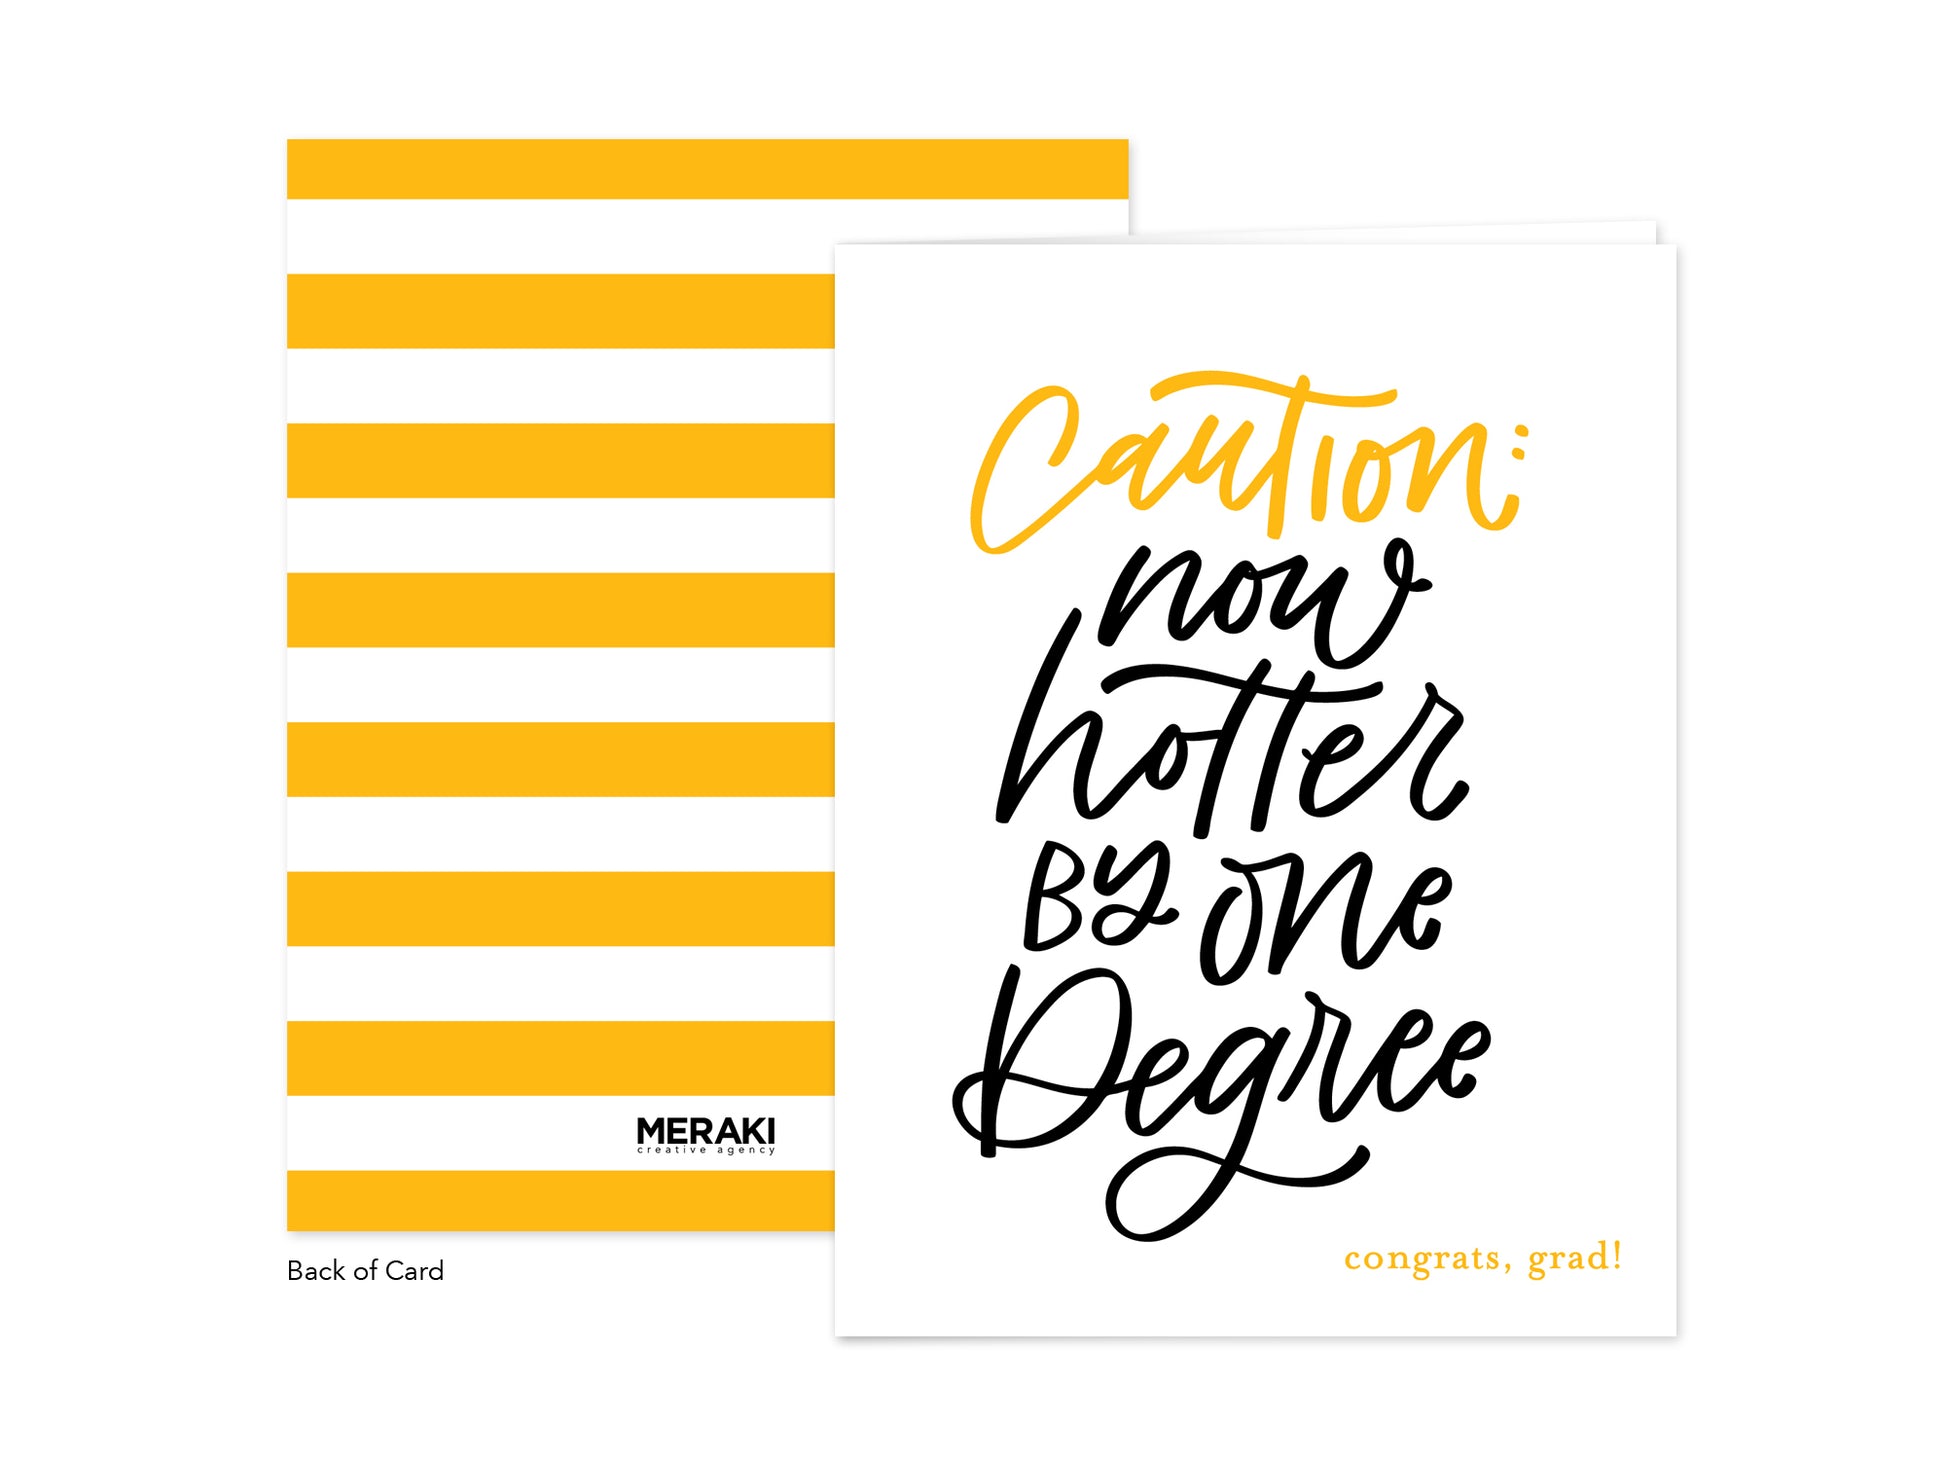 NOW HOTTER GRAD GREETING CARD.